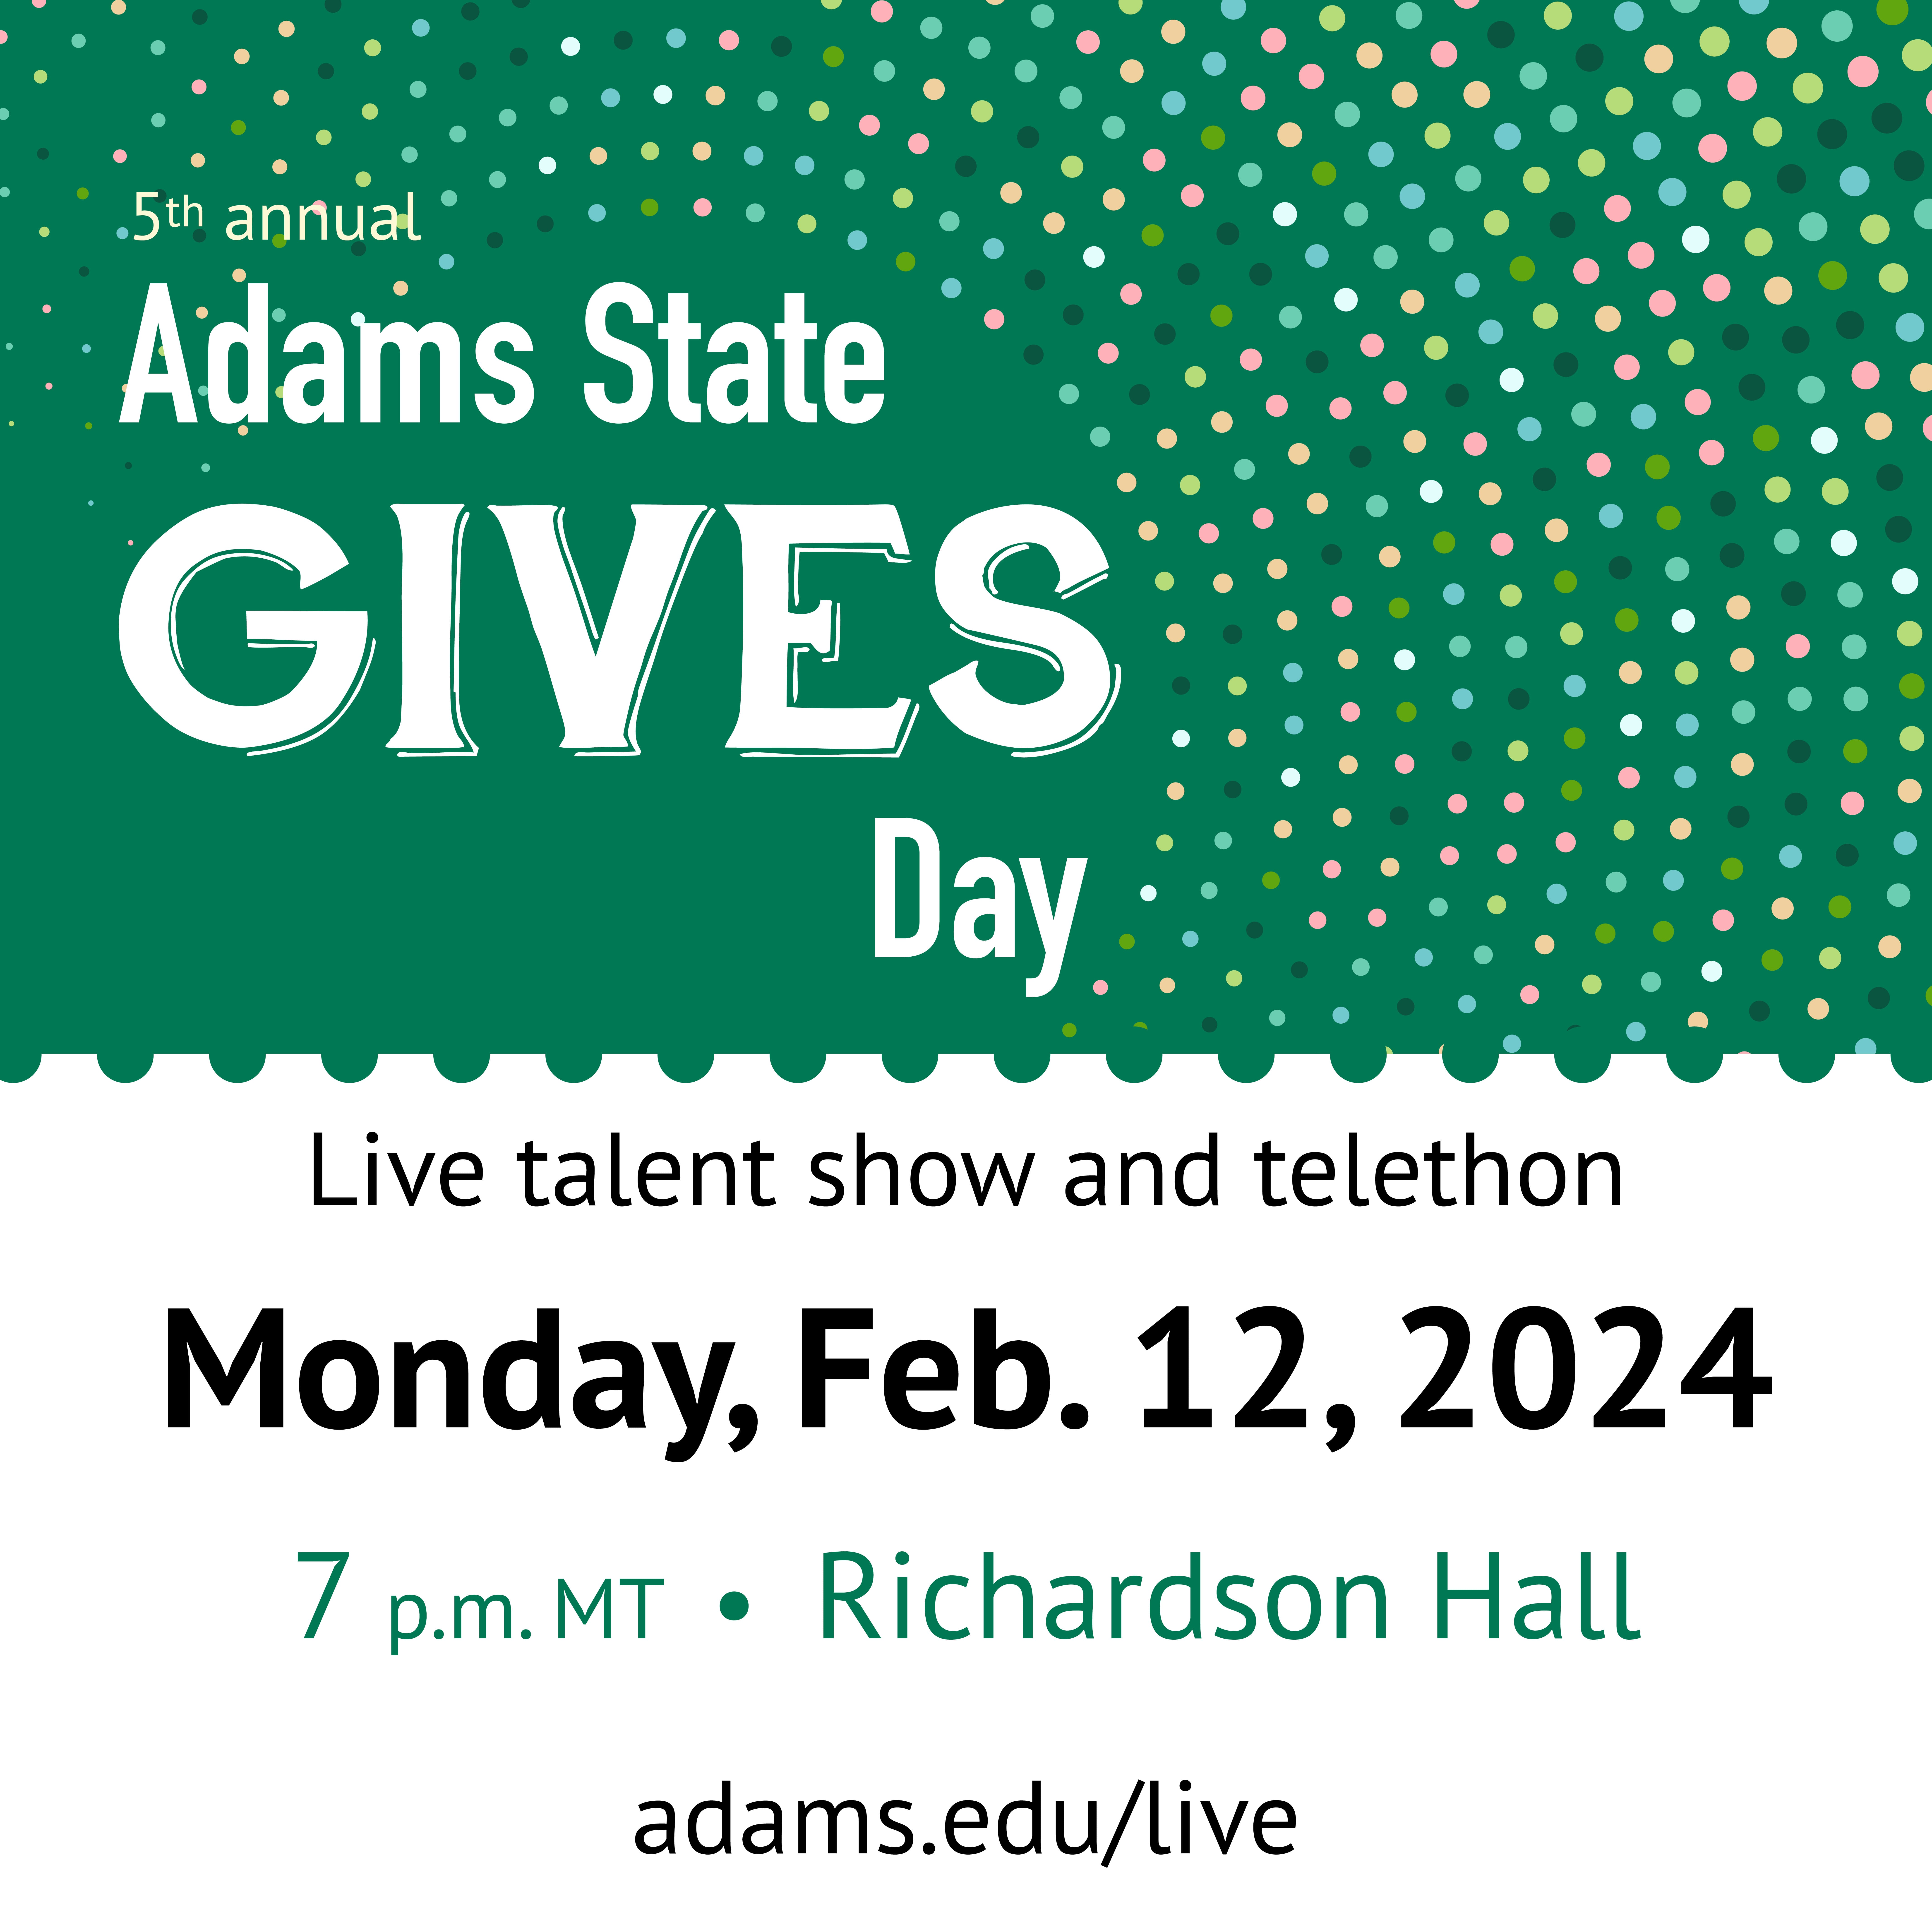 5th annual Adams State GIVES Day. Live talent show and telethon Monday, Feb. 12, 2024 7 p.m. MT Richardson Hall Adams.edu/live